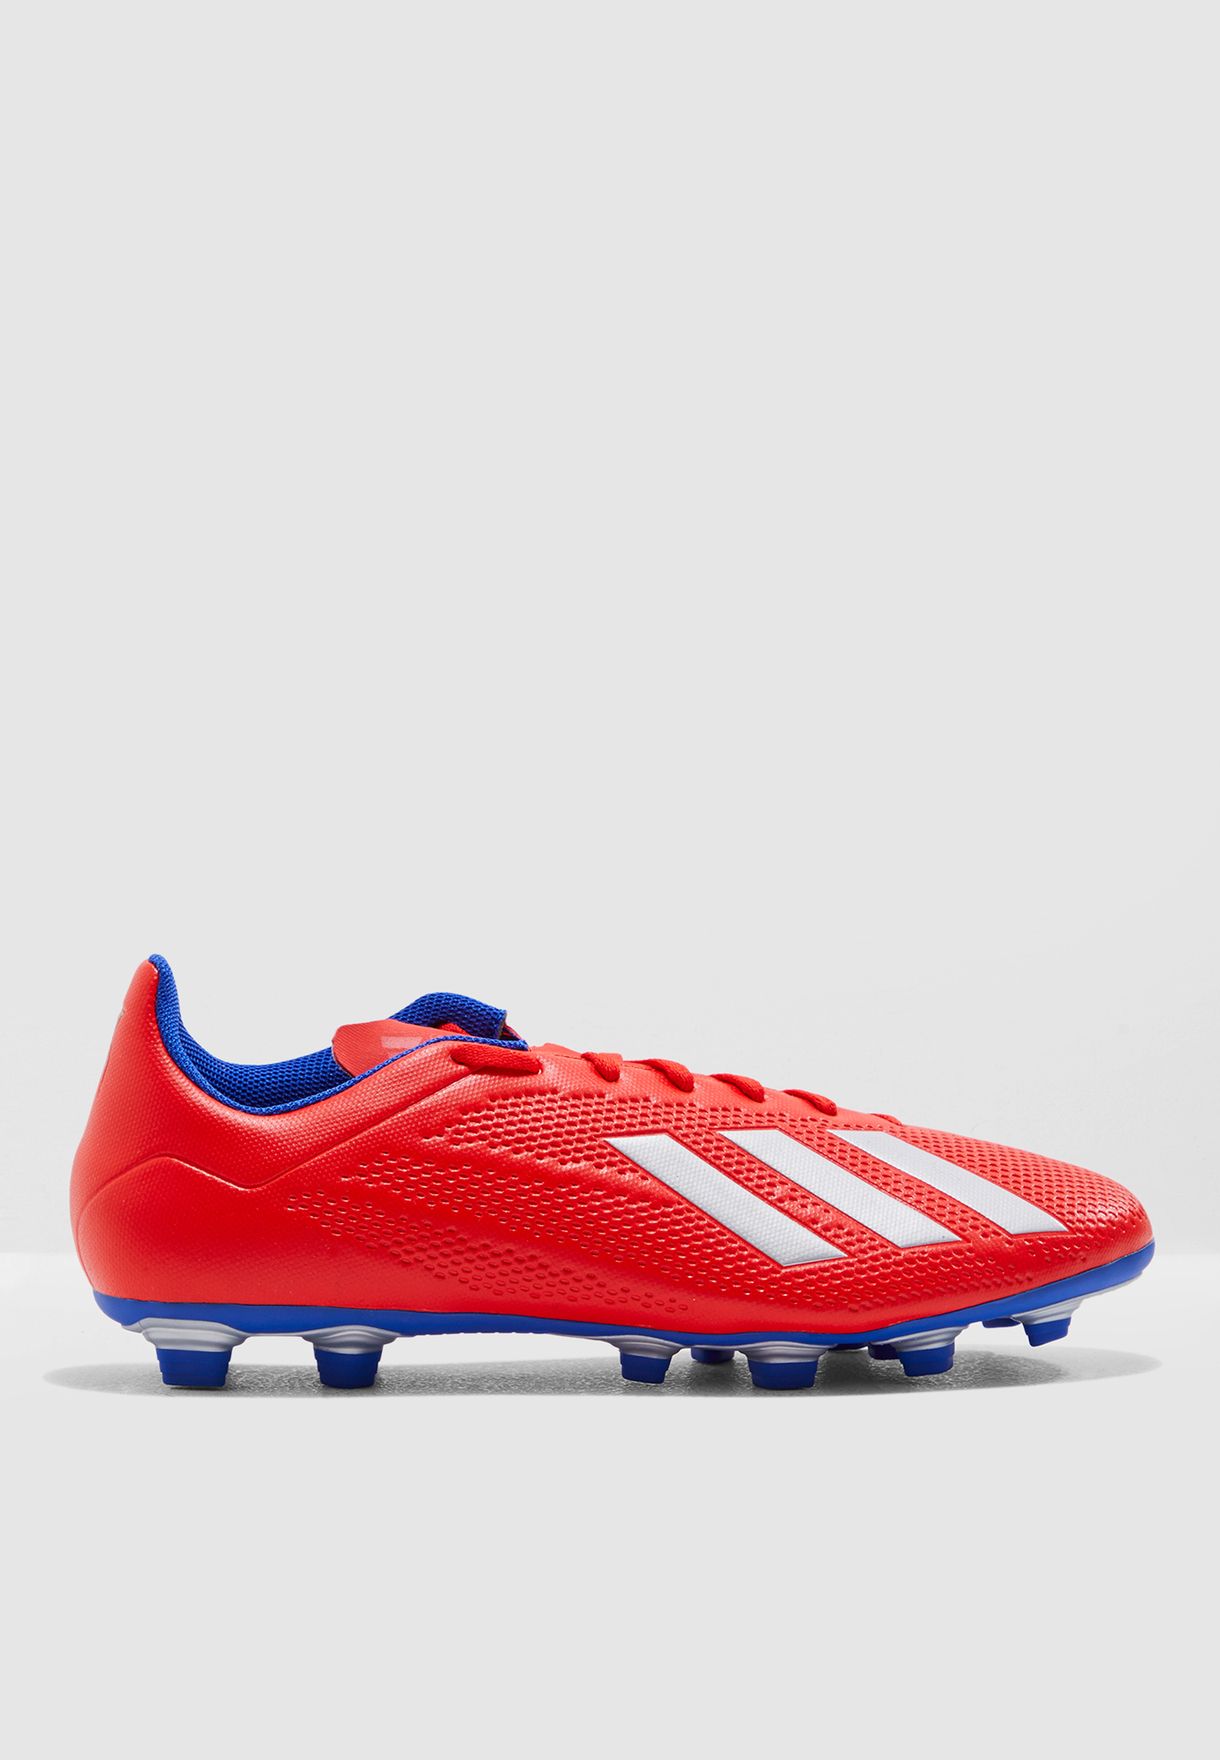 Buy Adidas Red X 18.4 Fg for Men in Mena, Worldwide, Globally 